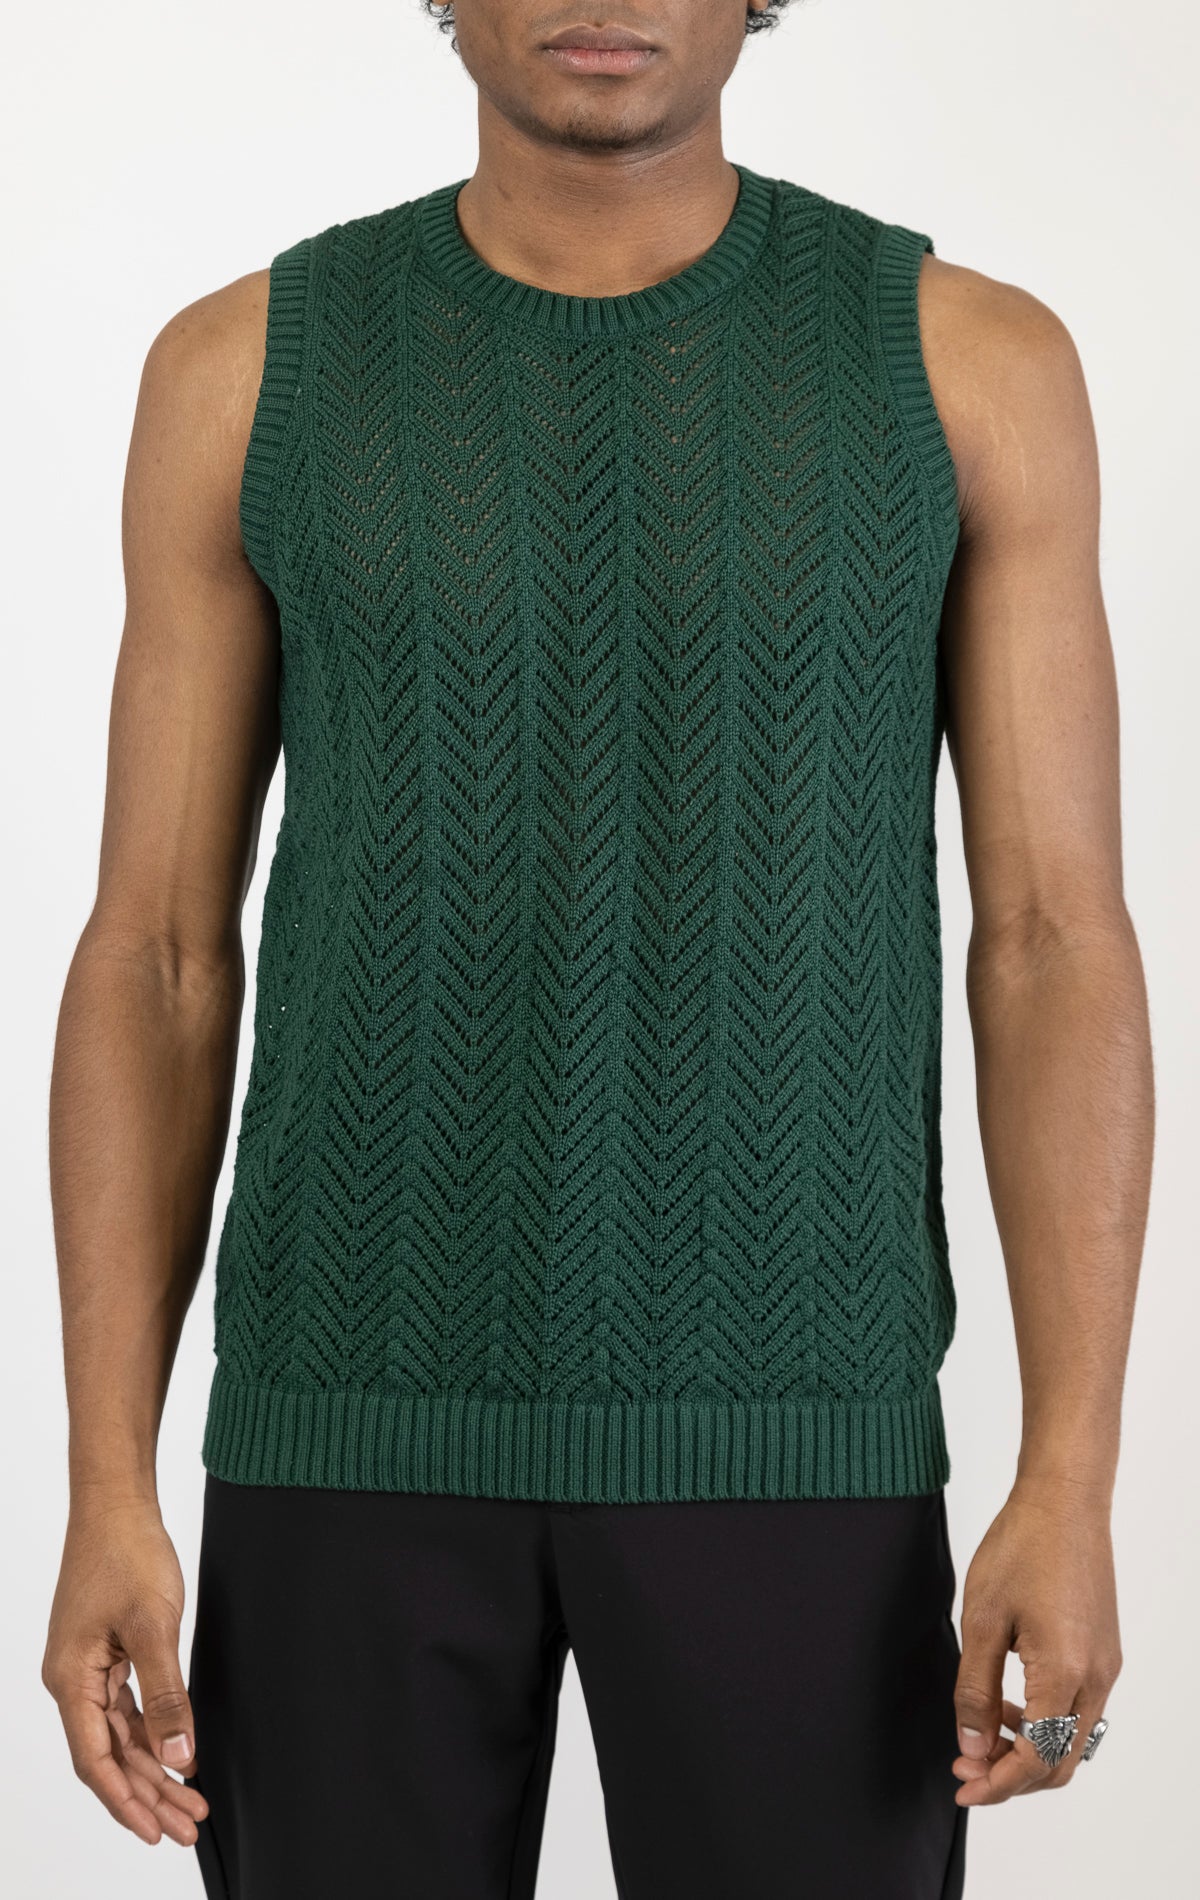 Men's knit muscle fit tank top in green. The tank top is made from a 50% cotton, 50% acrylic blend and features a muscle fit cut, sleeveless construction, and a textured knit fabric.